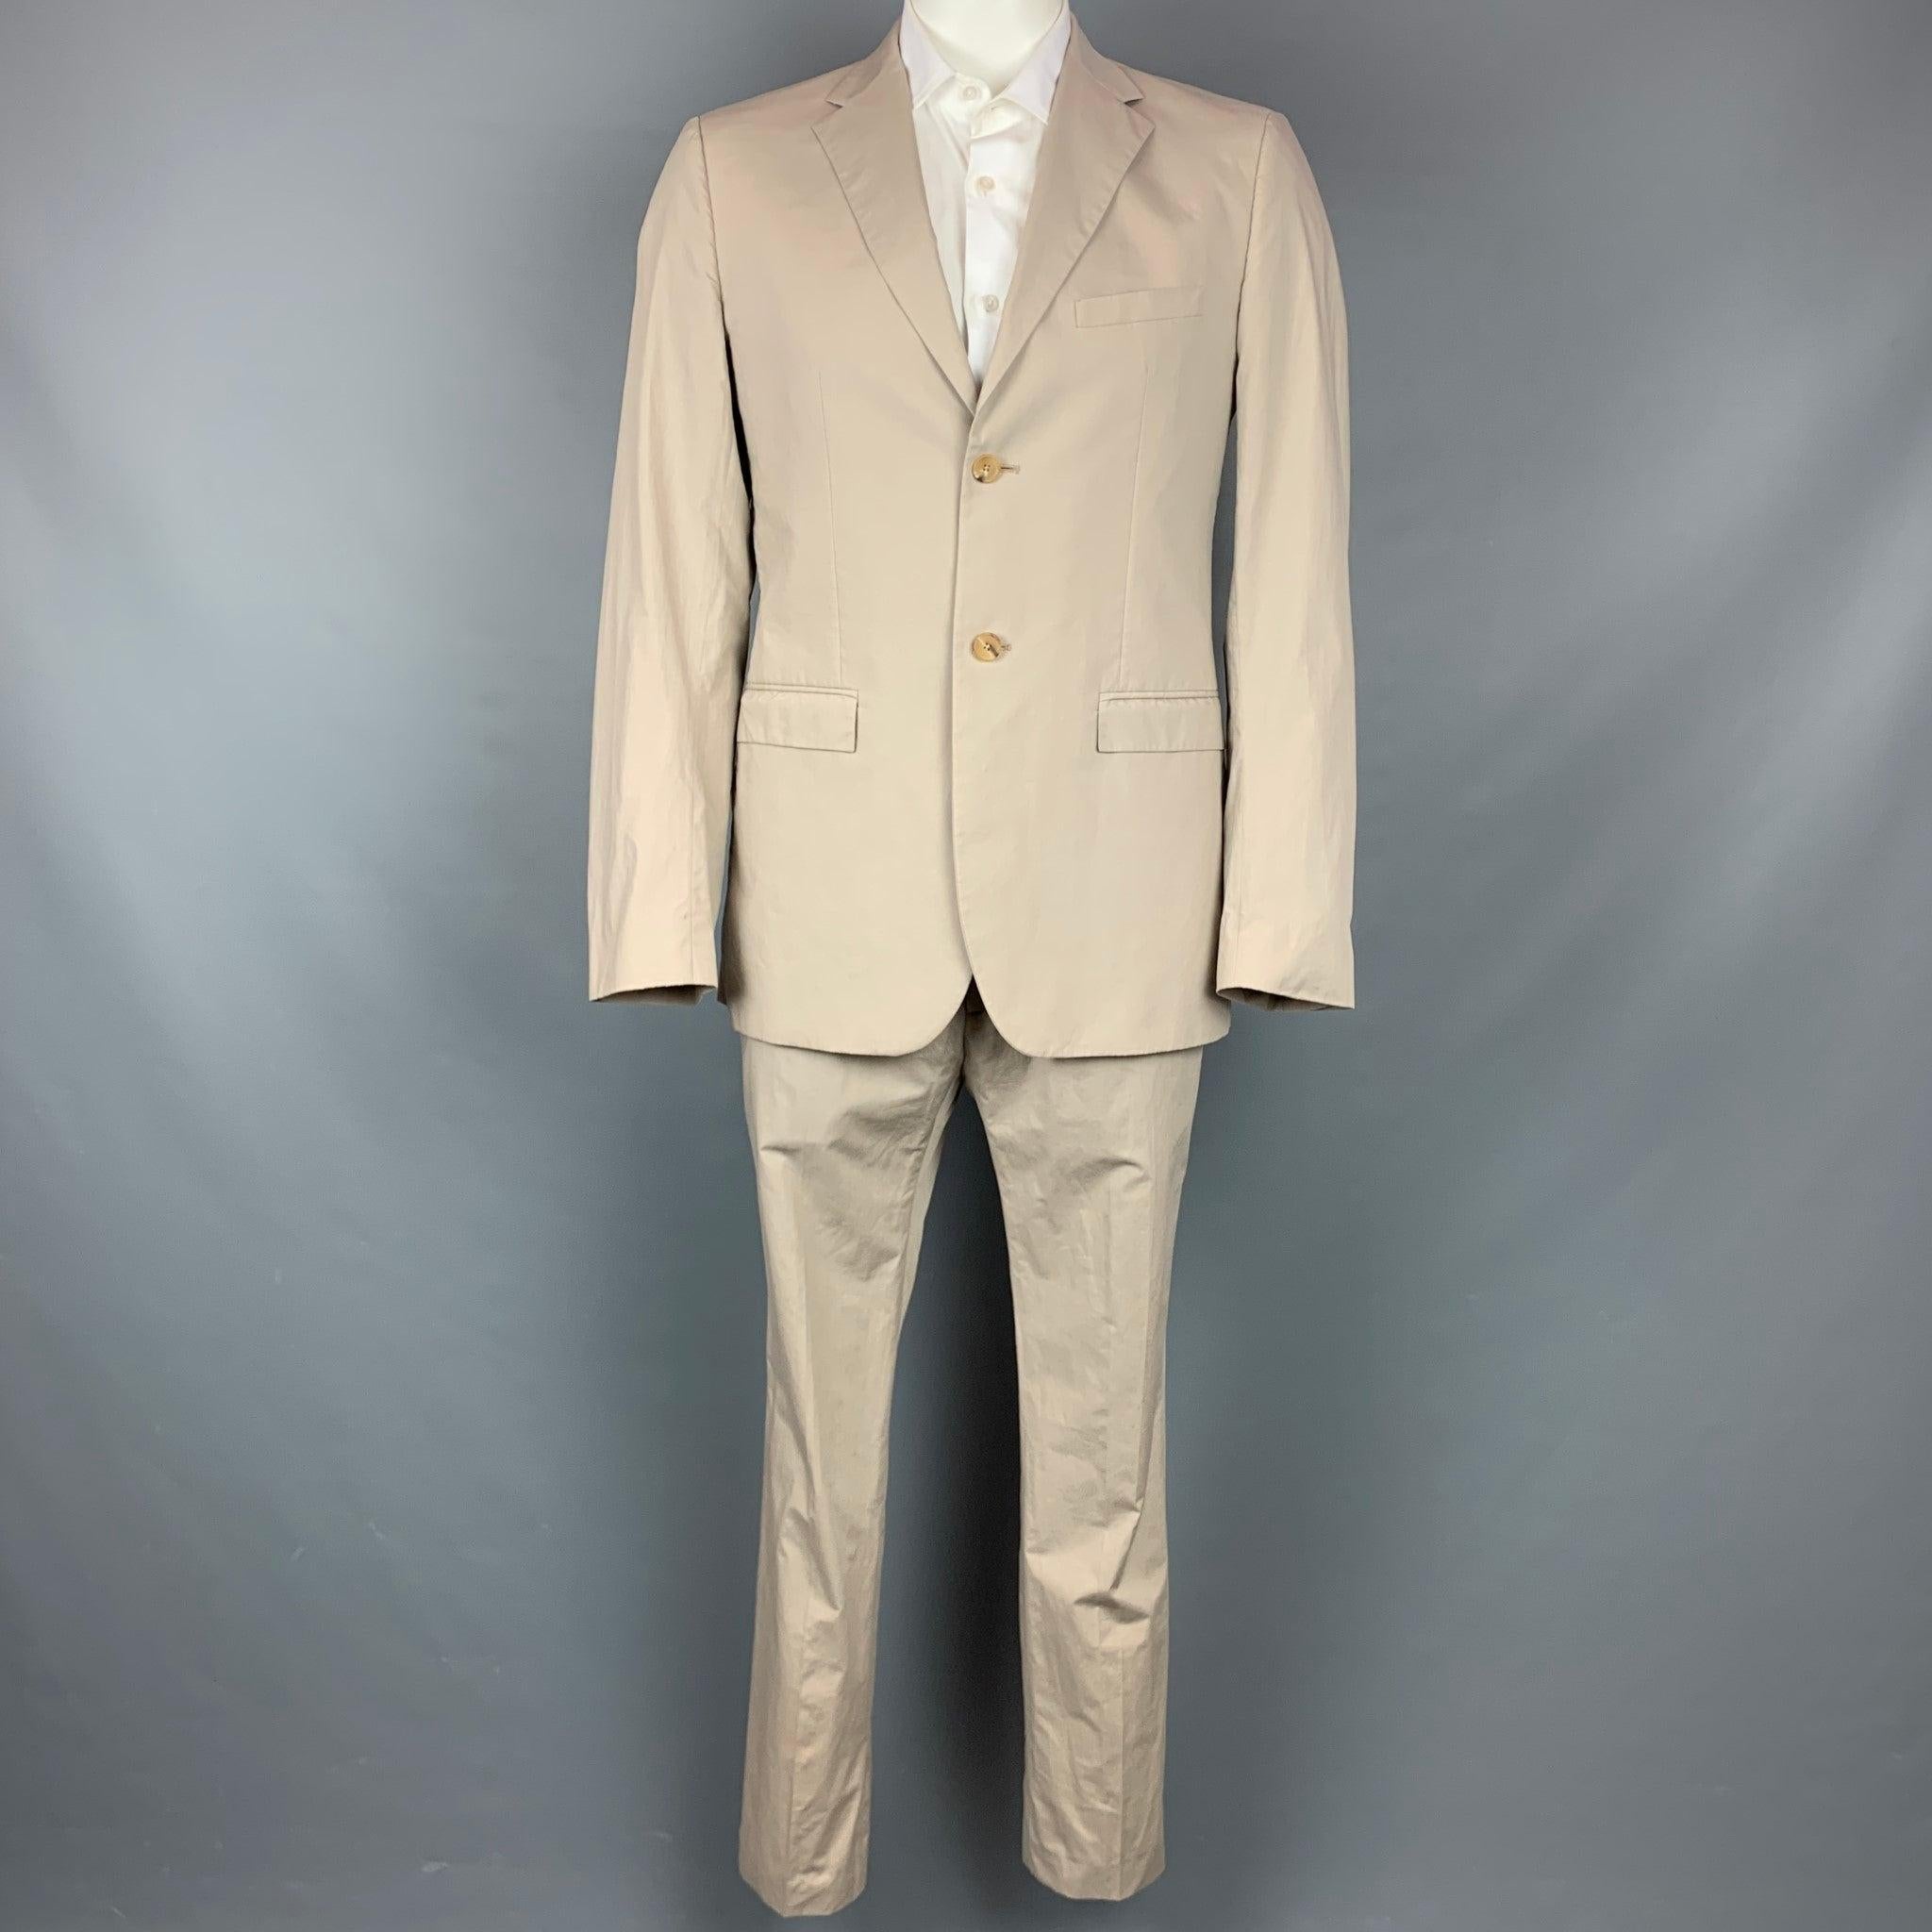 JIL SANDER
suit comes in khaki cotton with a full liner and includes a single breasted, two button sport coat with a notch lapel and matching flat front trousers. Made in Italy. Good Pre-Owned Condition. Light marks at front.  

Marked:   Jacket: IT